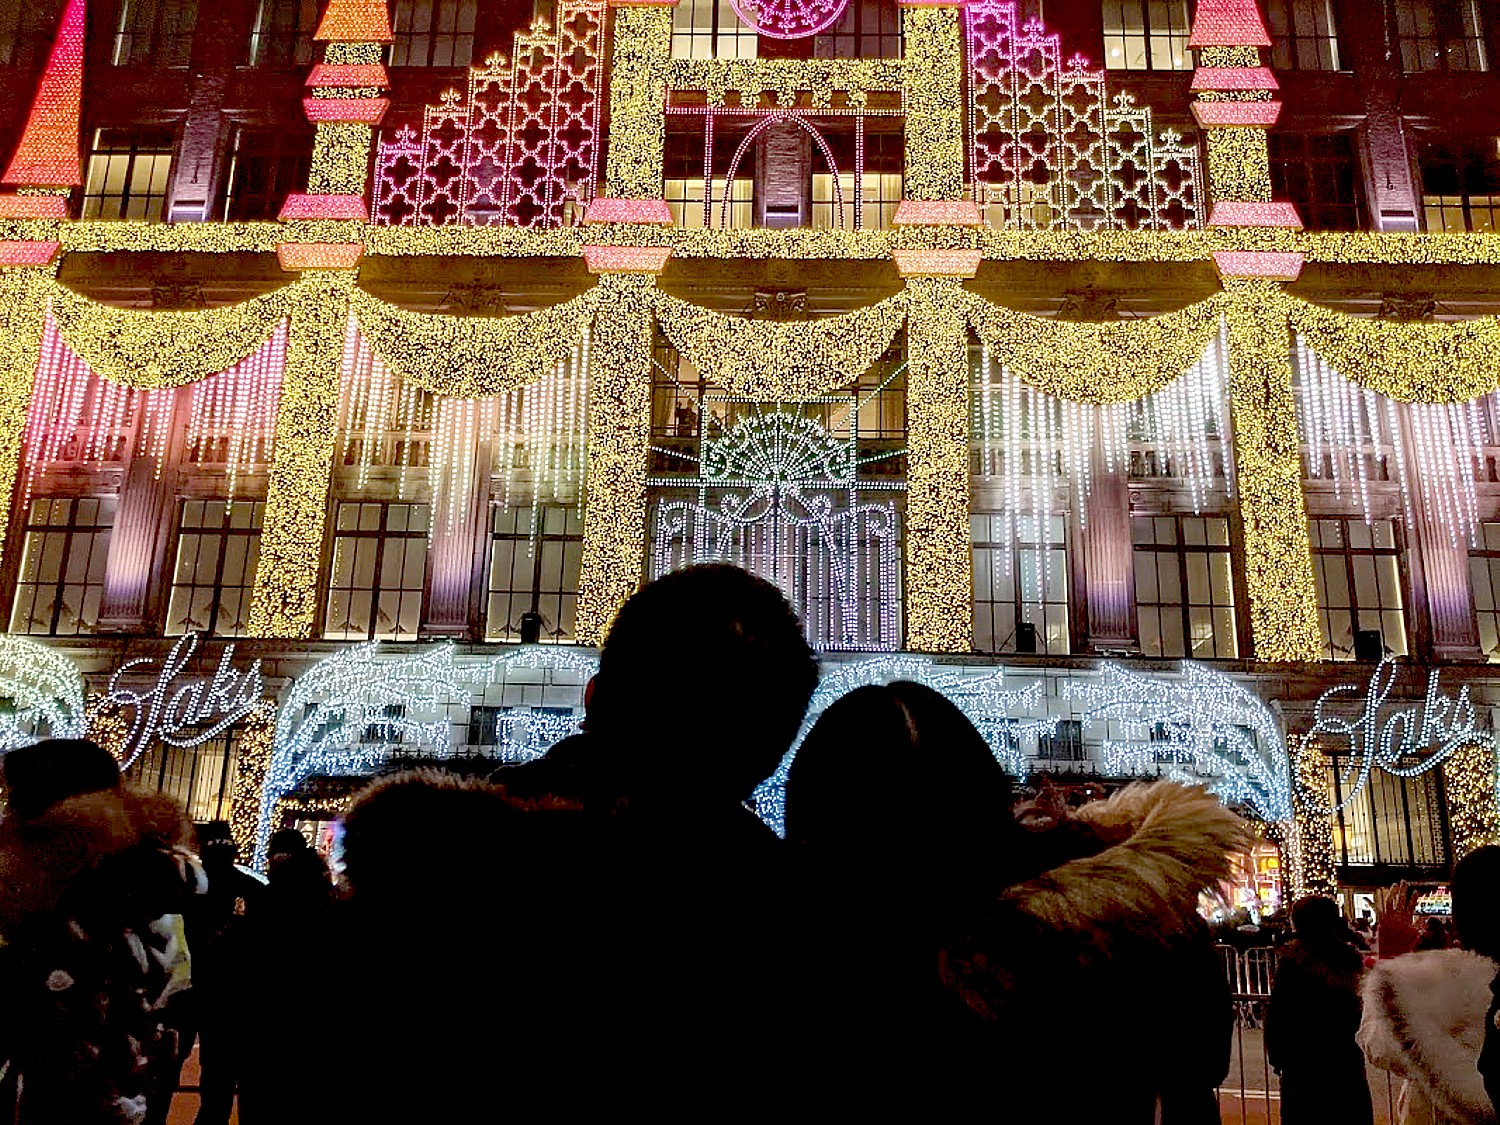 Saks Fifth Avenue's iconic holiday light show returns